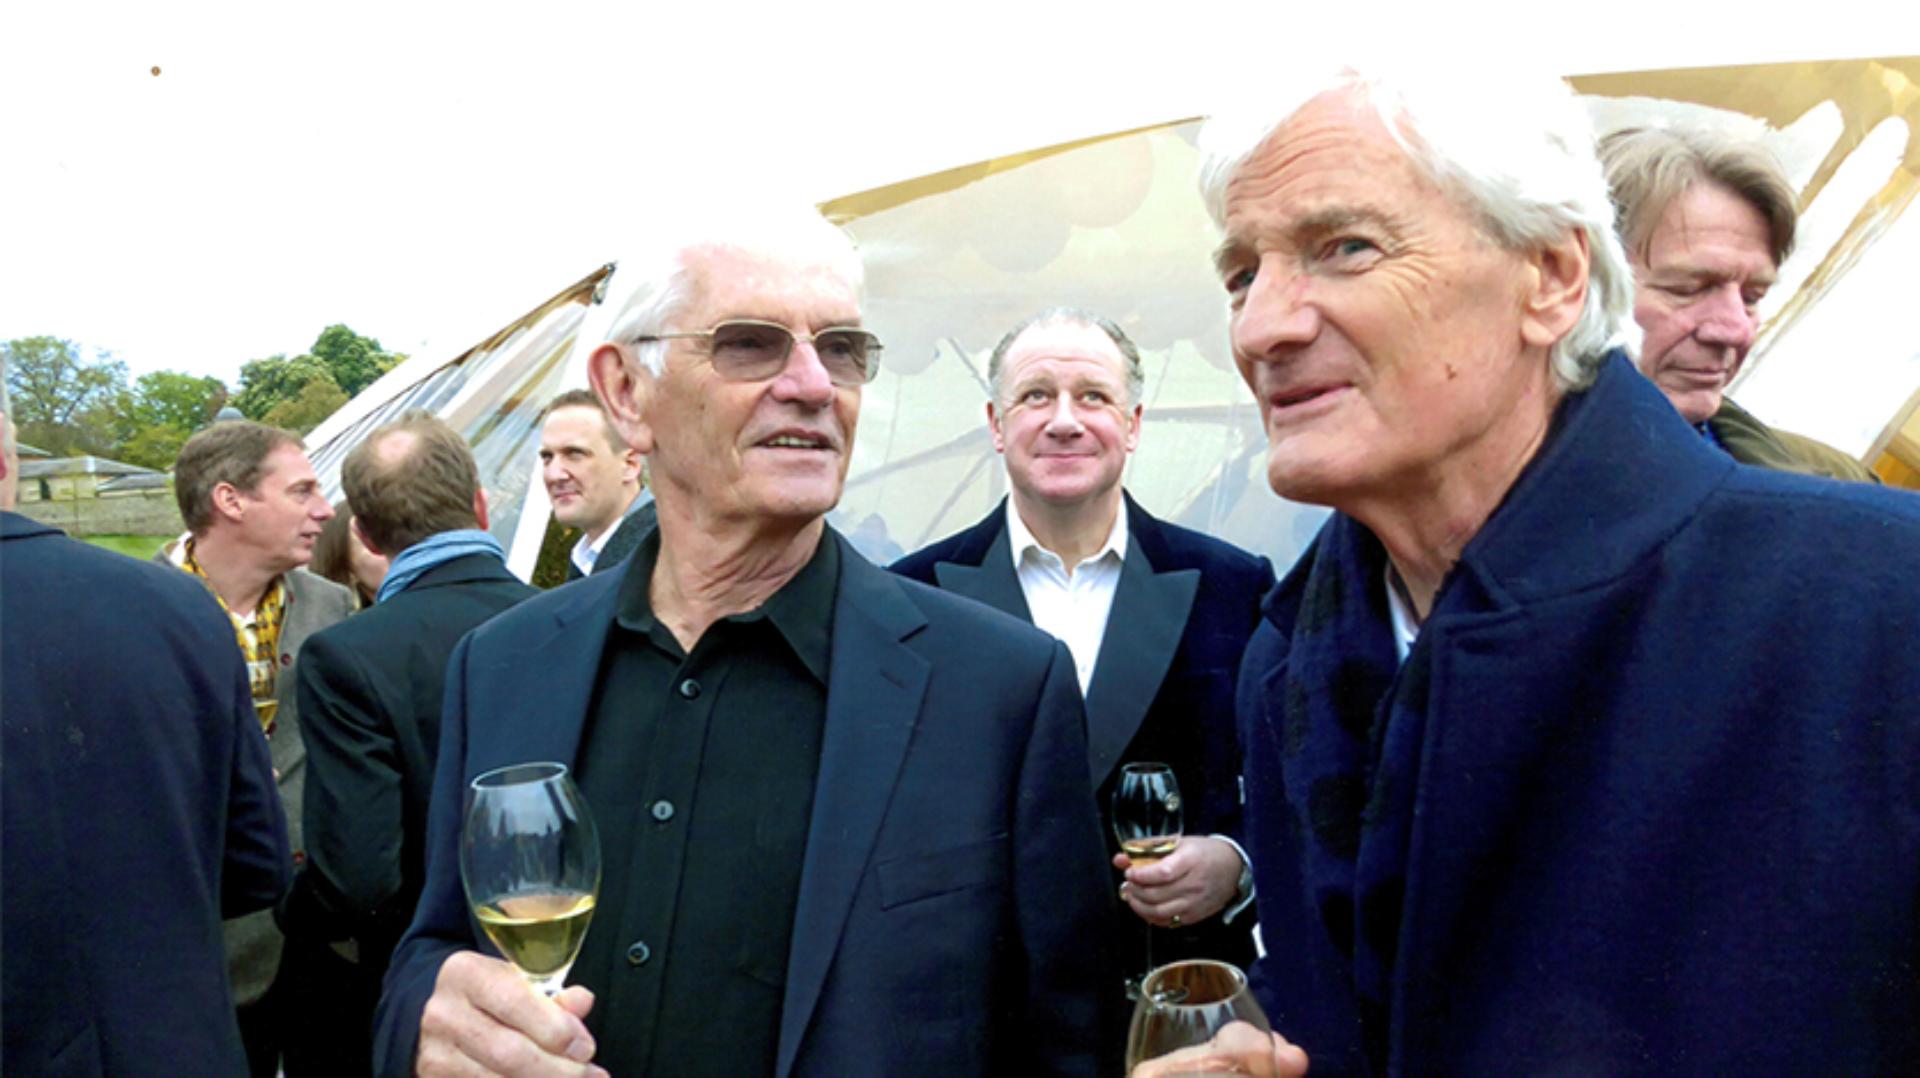 James Dyson with Ross Cameron